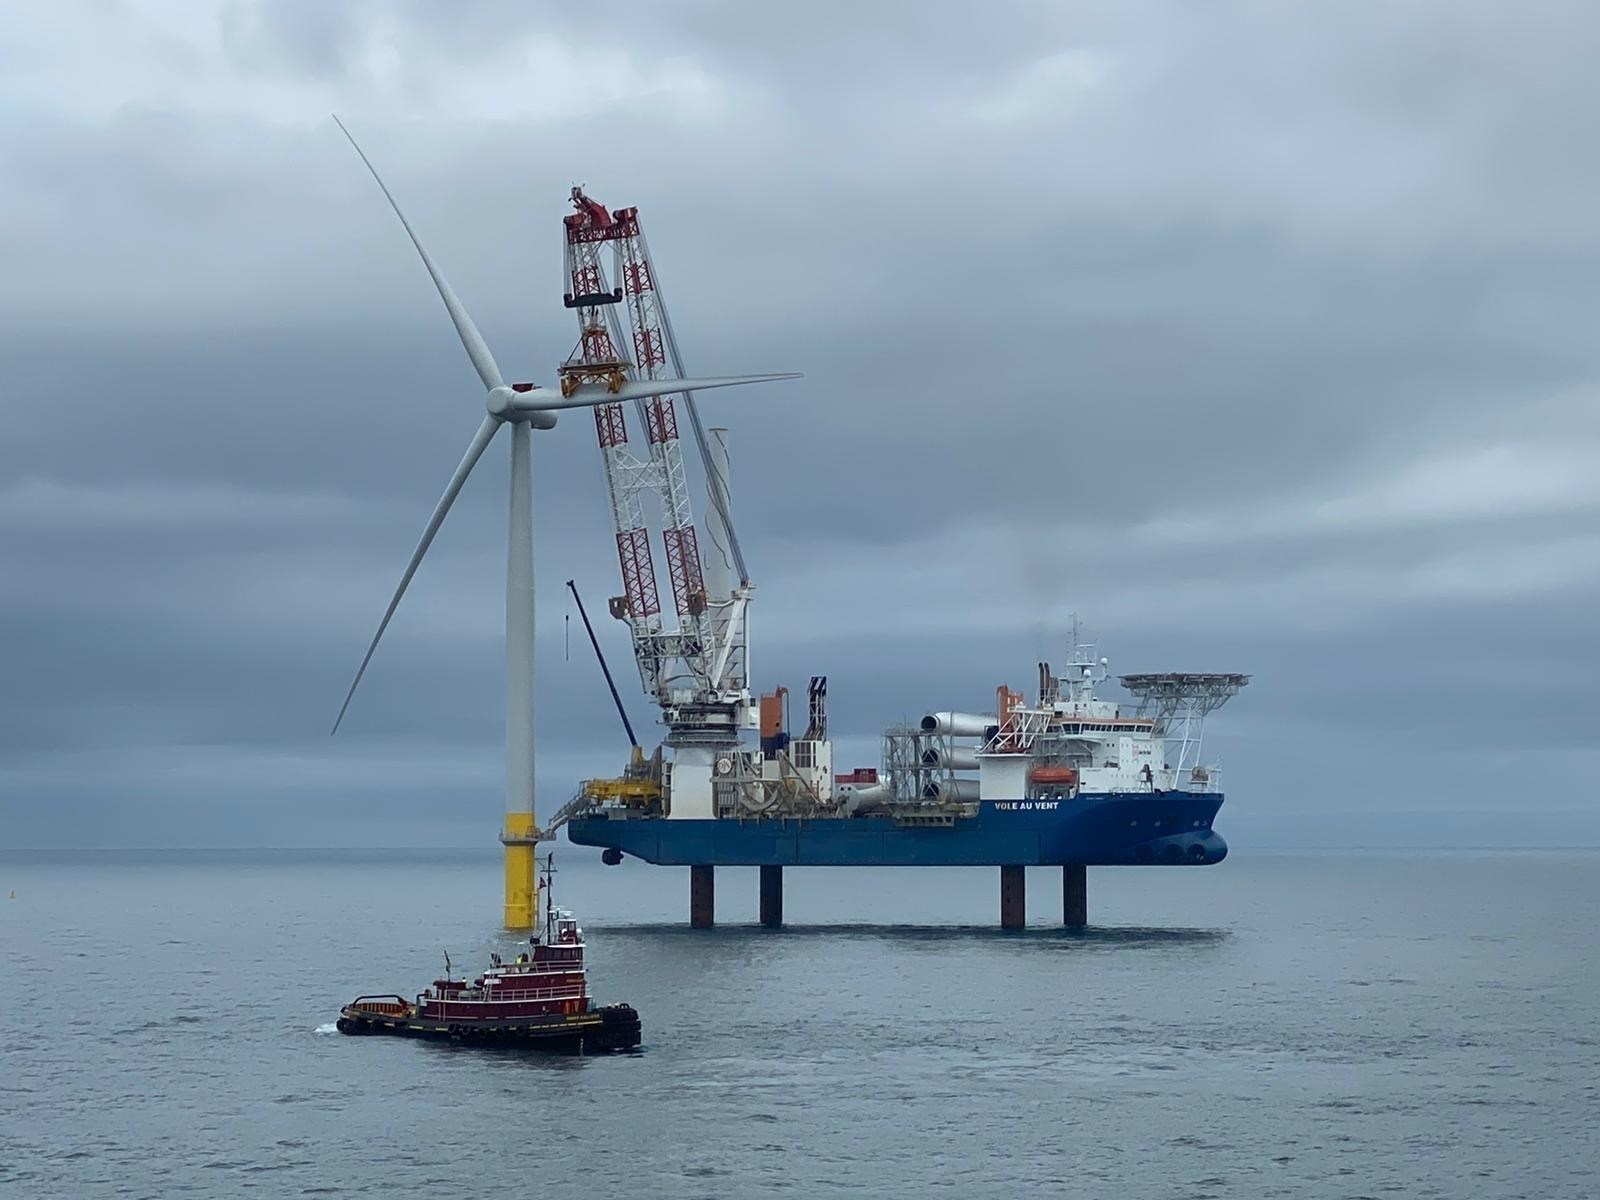 dominion-completes-virginia-offshore-pilot-project-north-american